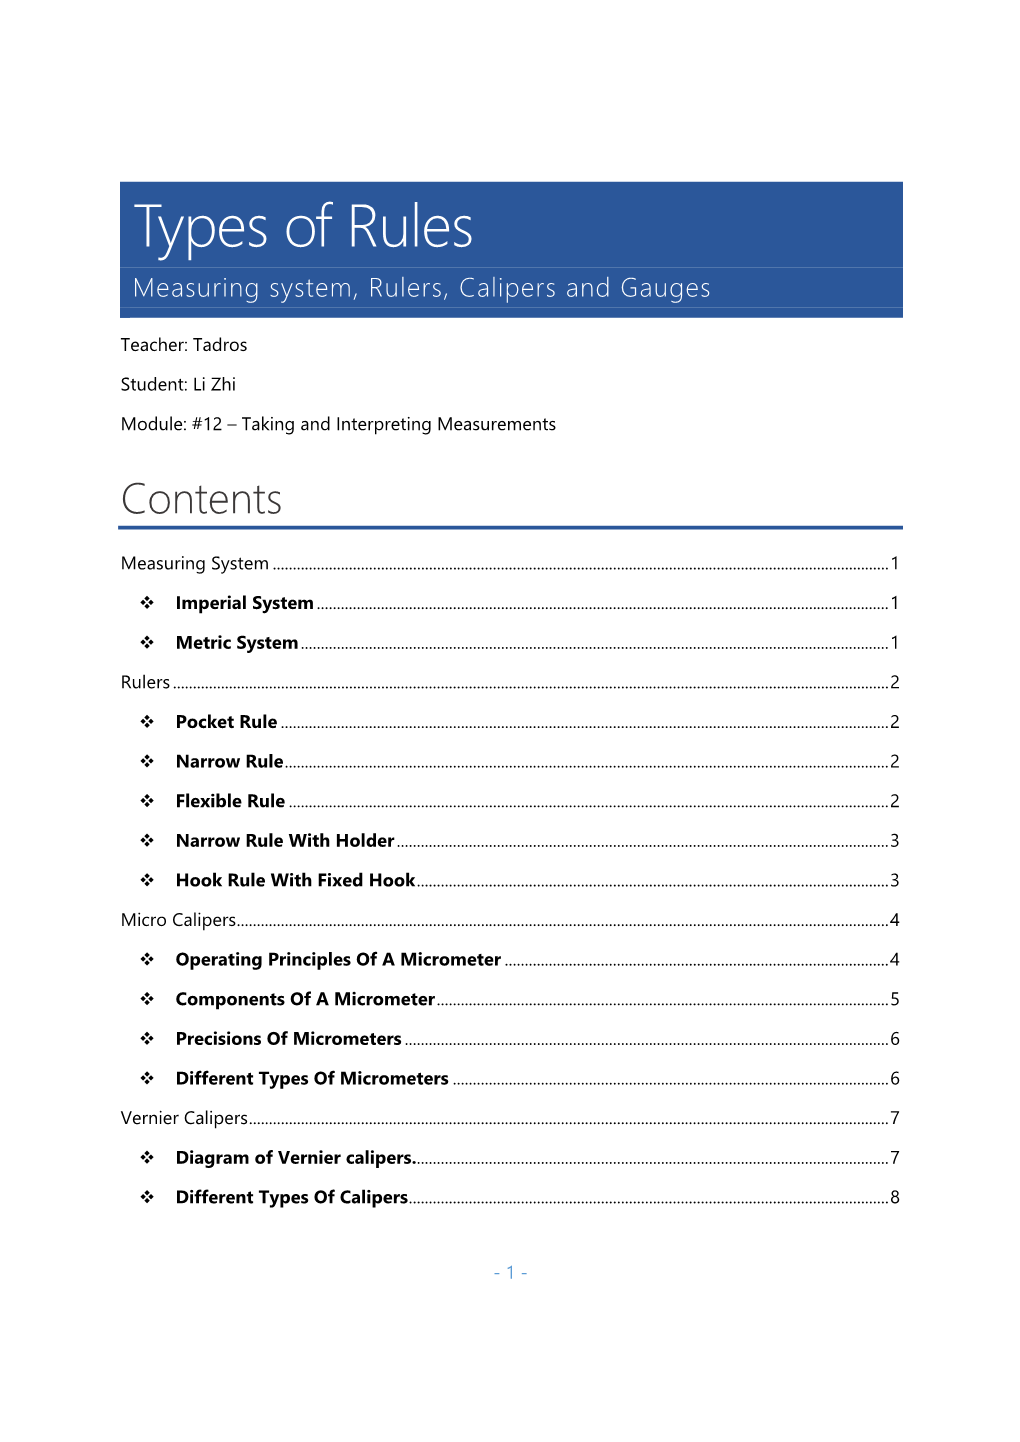 Types of Rules Measuring System, Rulers, Calipers and Gauges